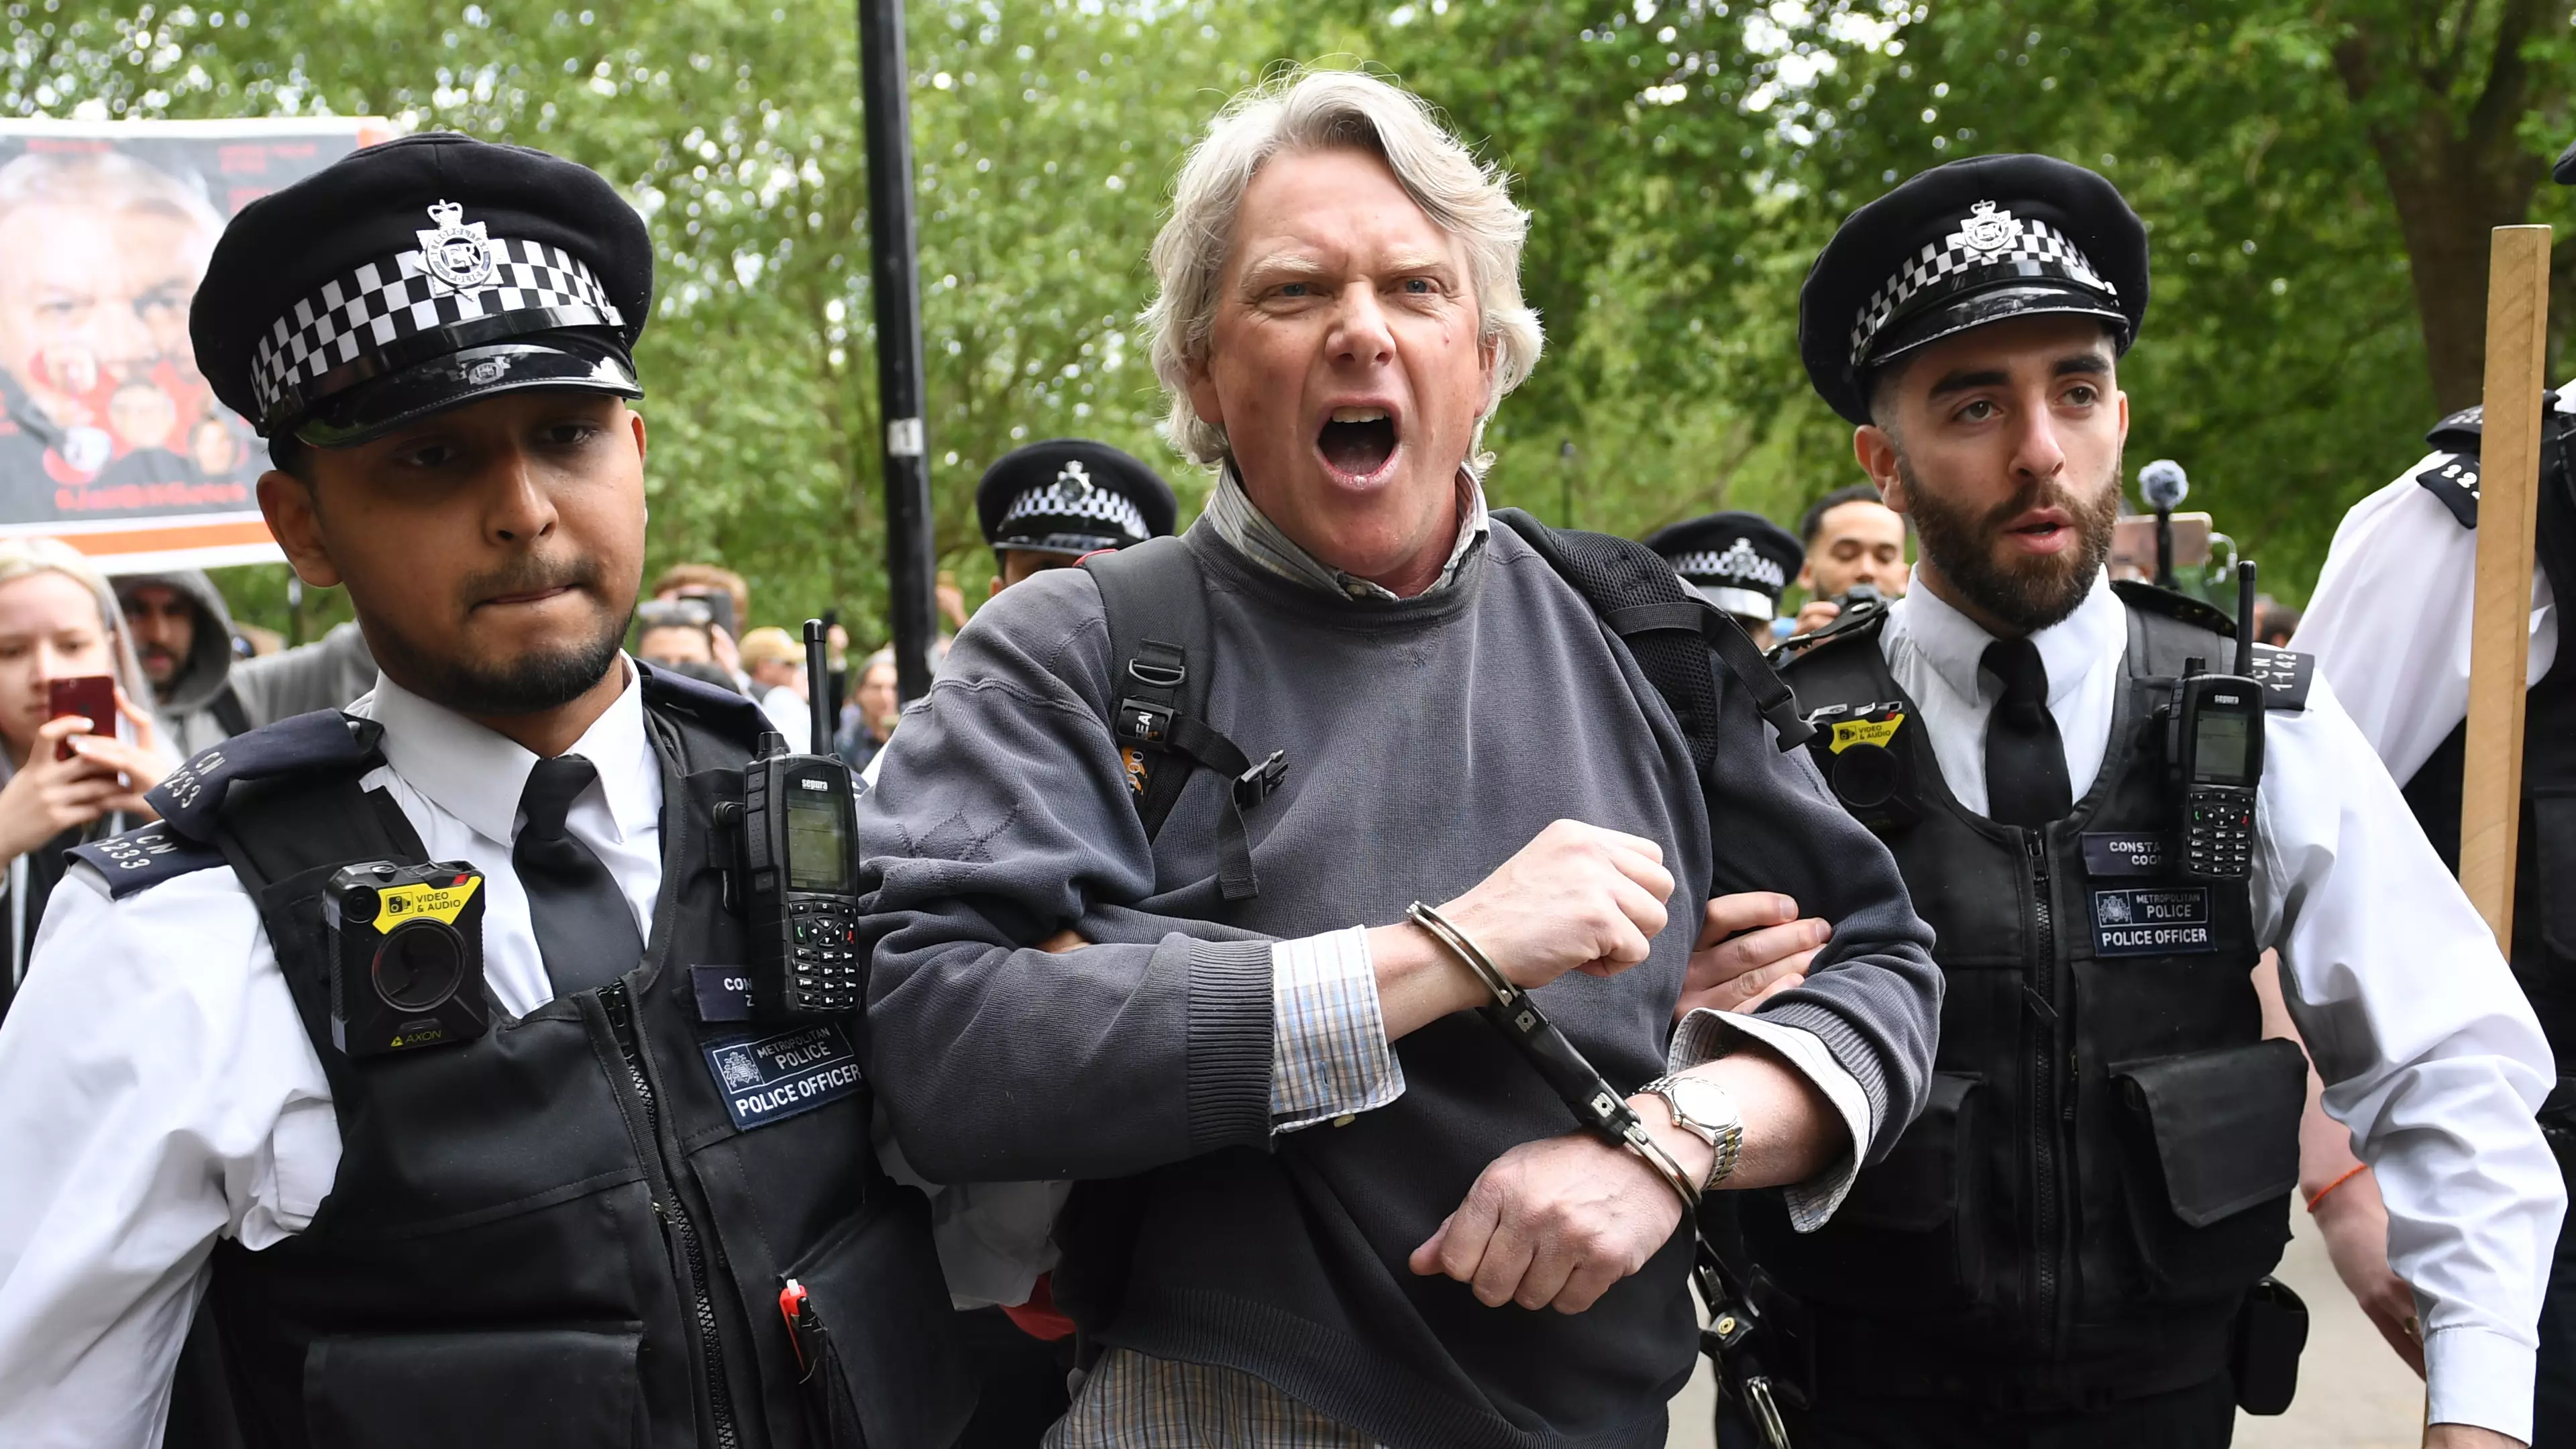 Arrests Made After Group Gathers In Hyde Park For Anti-Lockdown Protest